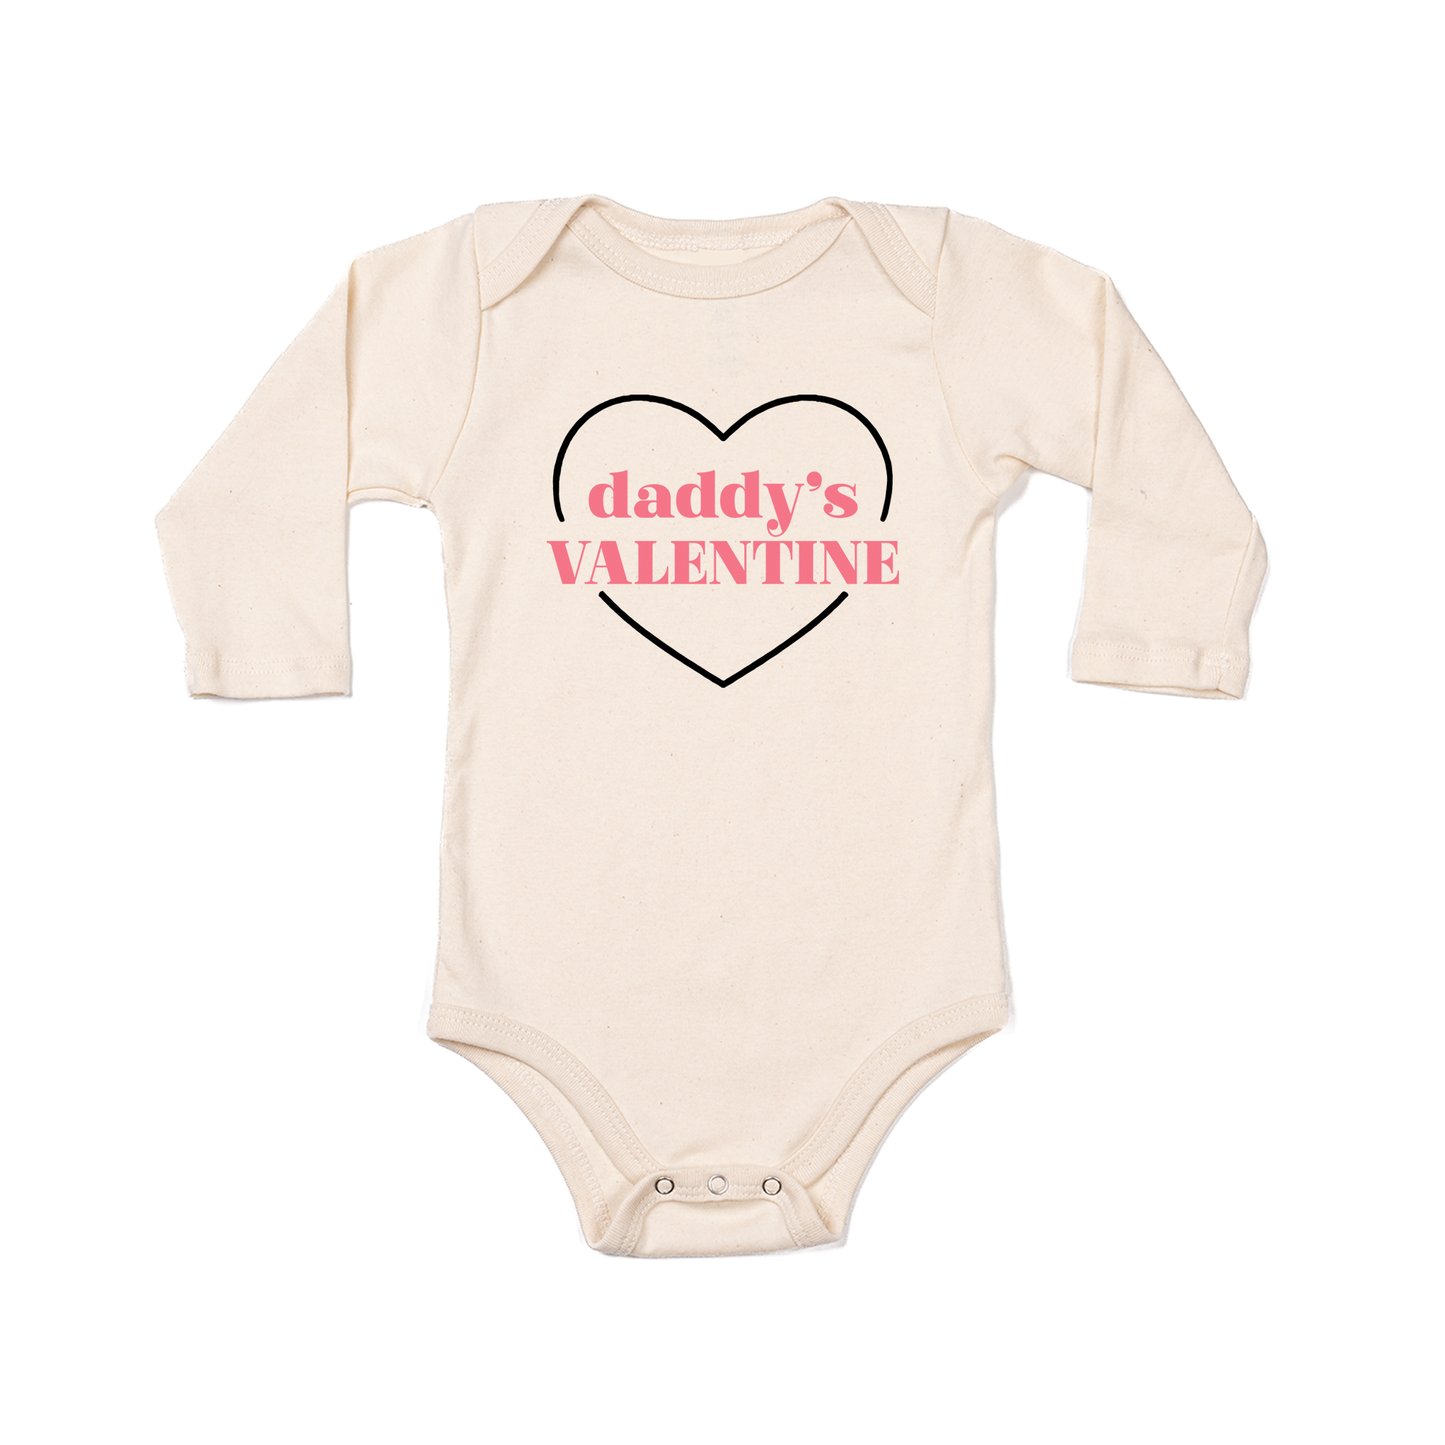 Daddy's Valentine - Bodysuit (Natural, Long Sleeve)